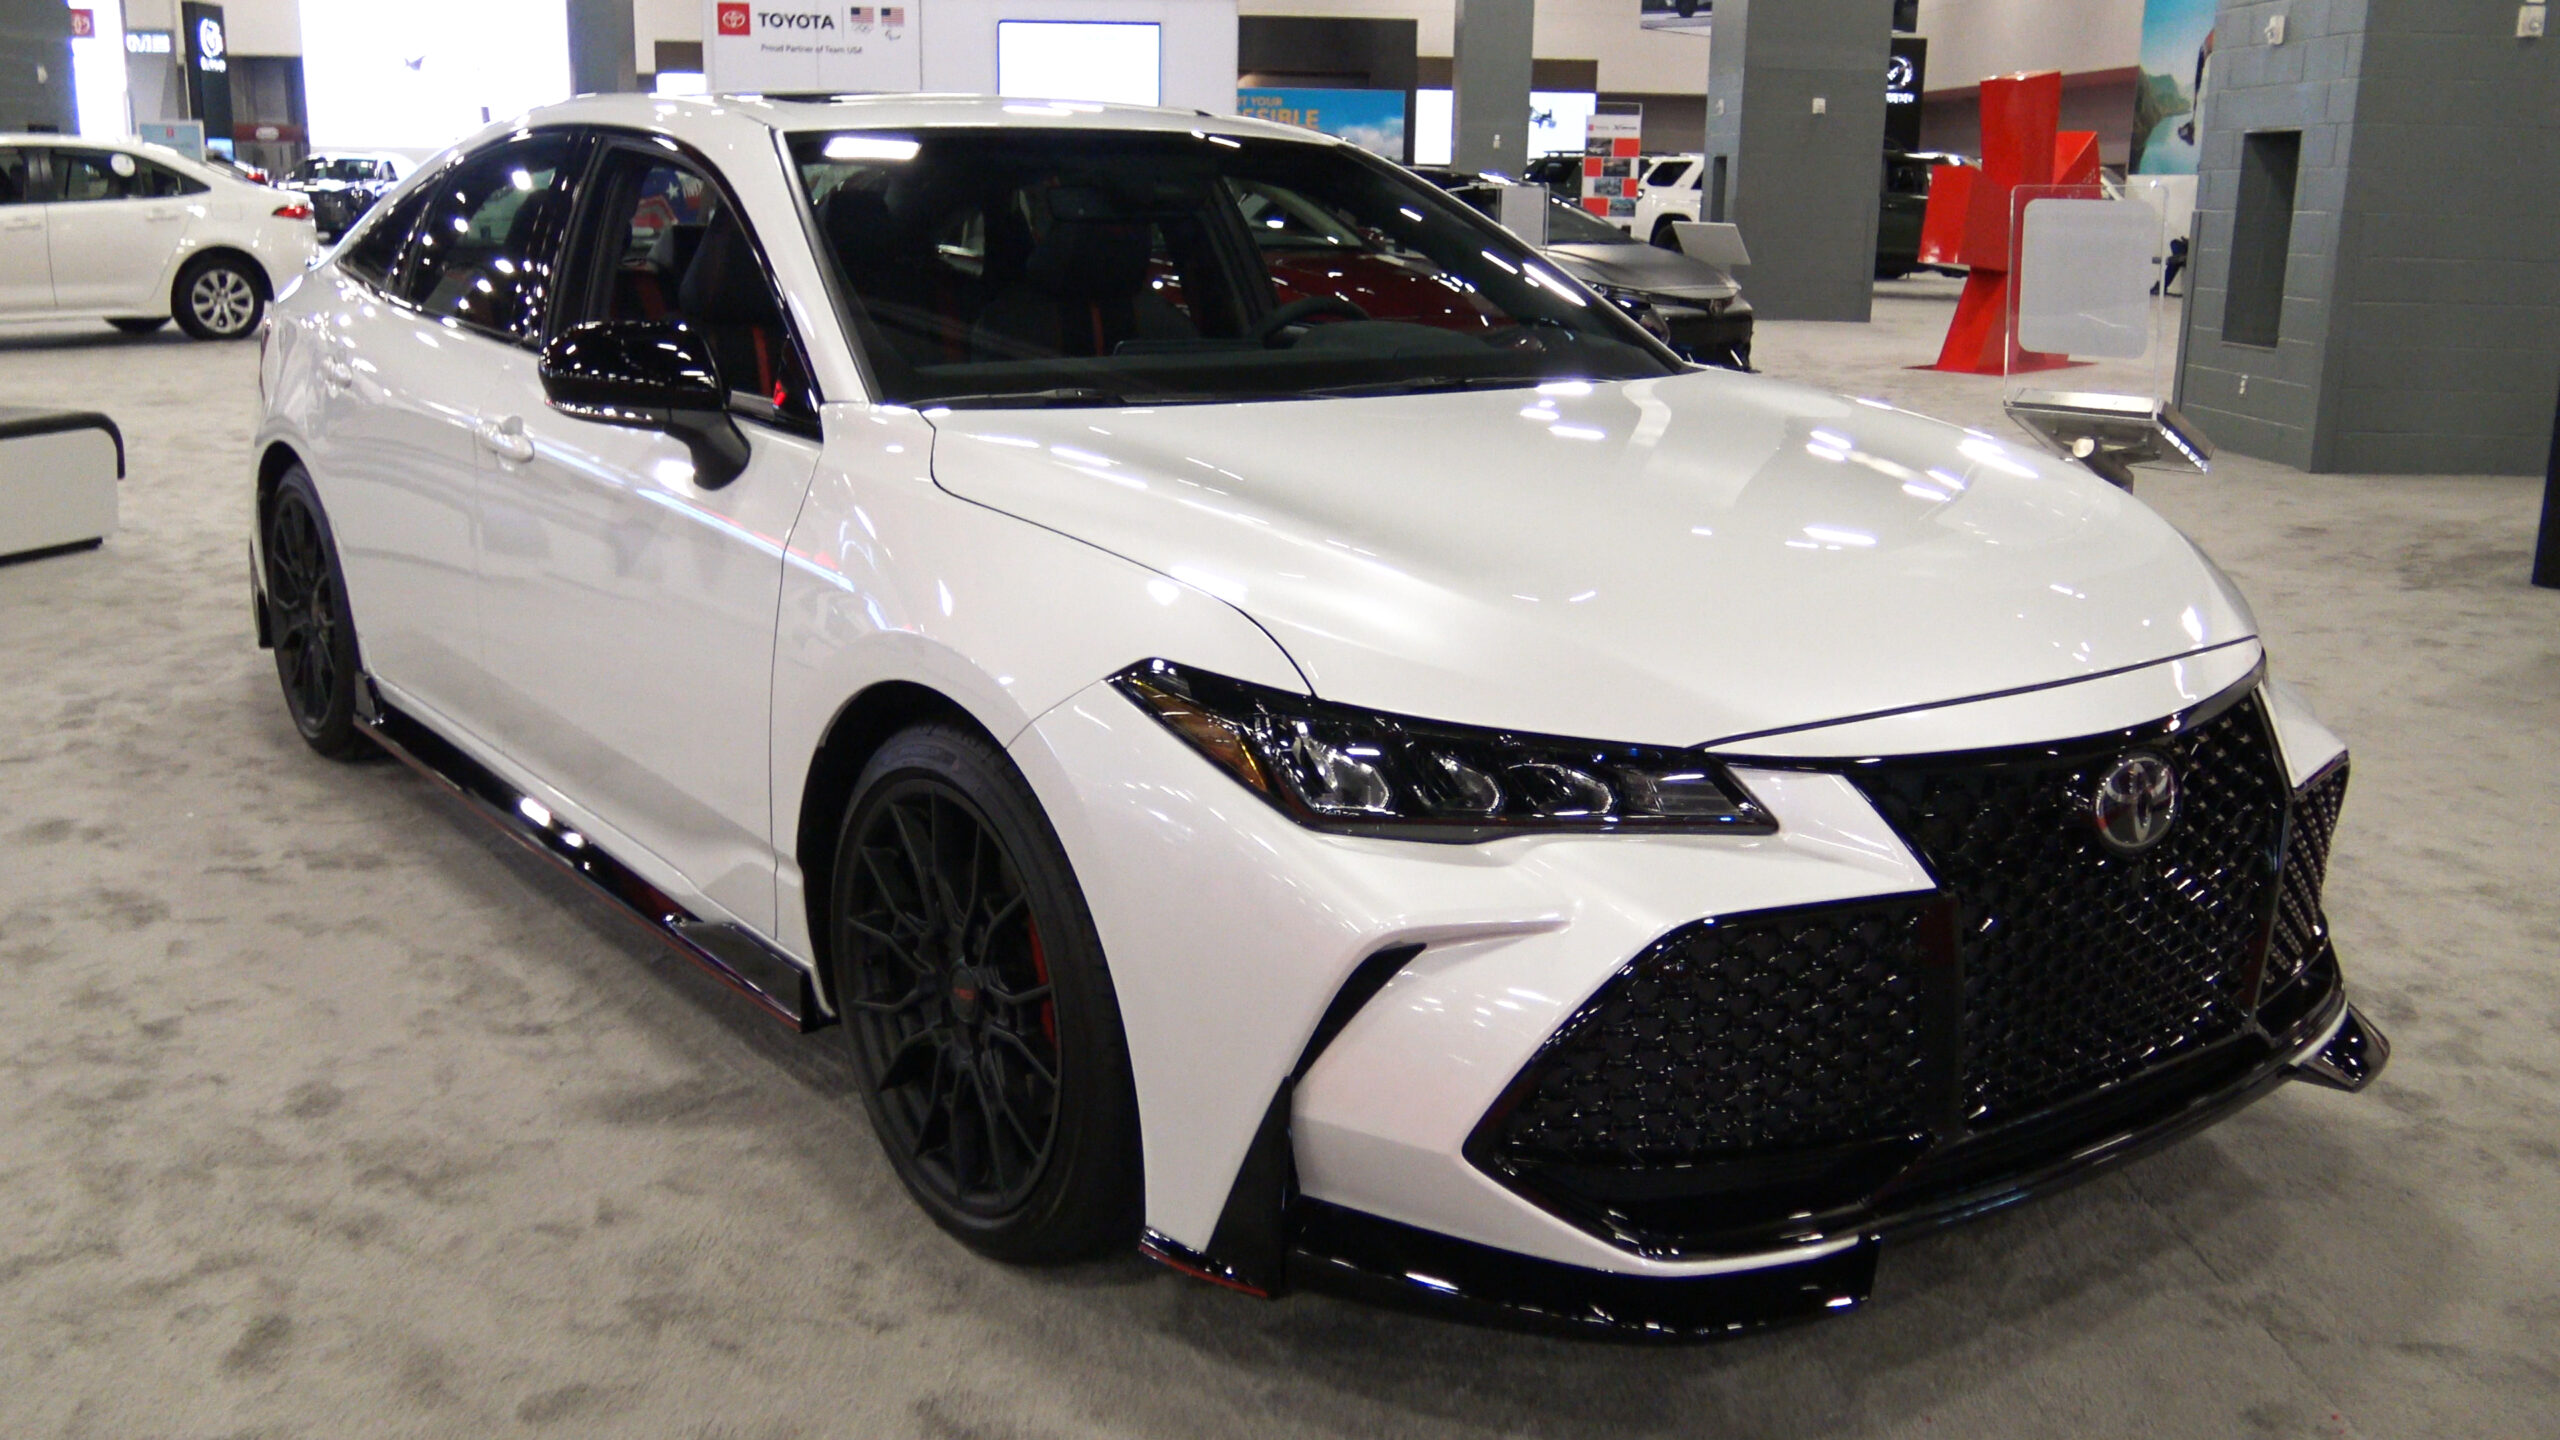 2020 Toyota Avalon TRD in silver